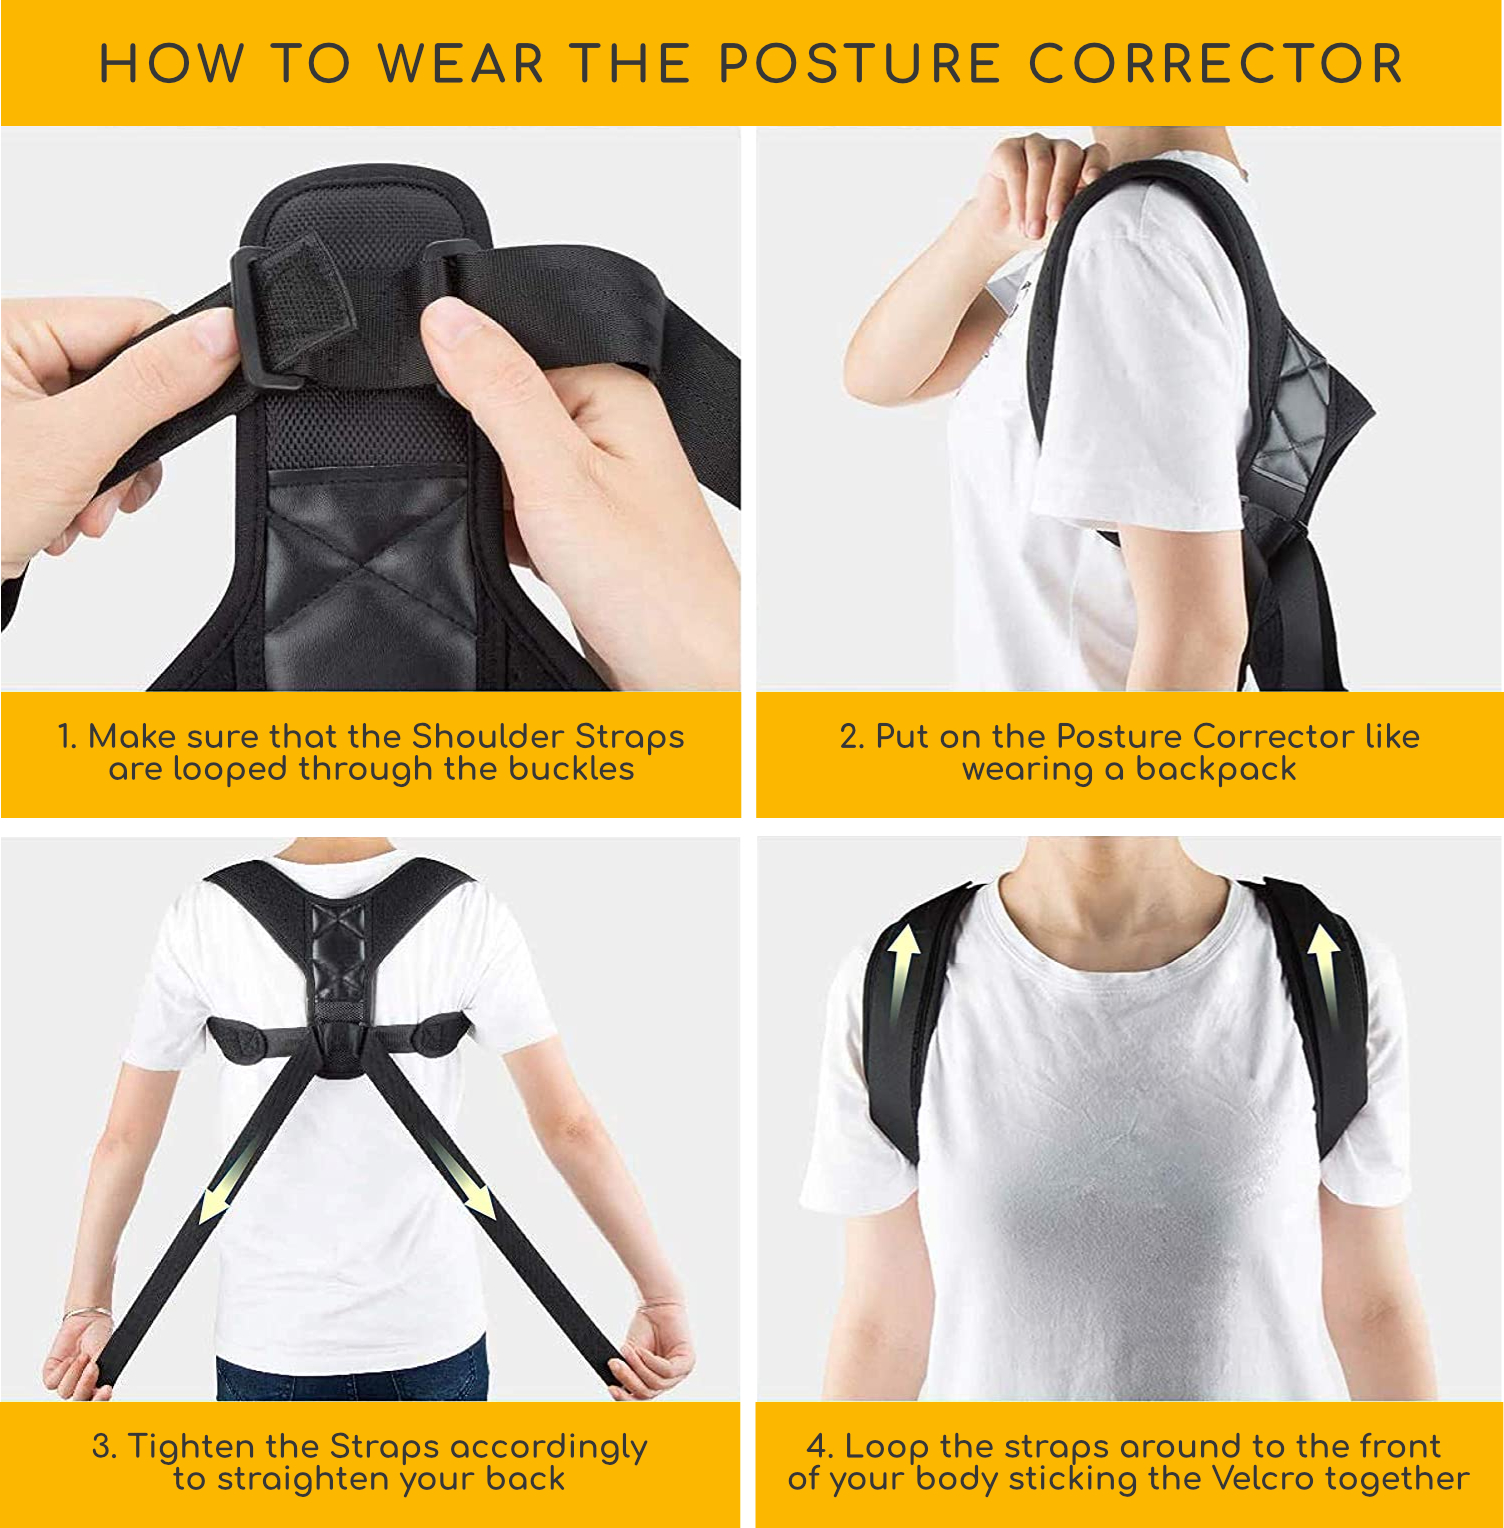 How to wear the posture correct correctly. 1. First, make sure that the Shoulder Straps are looped through the buckles. 2. Secondly, put on the Posture Corrector like wearing a backpack. 3. Next, tighten the Straps accordingly to straighten your back. 4. Lastly, loop the straps around to the front of your body sticking the Velcro together.